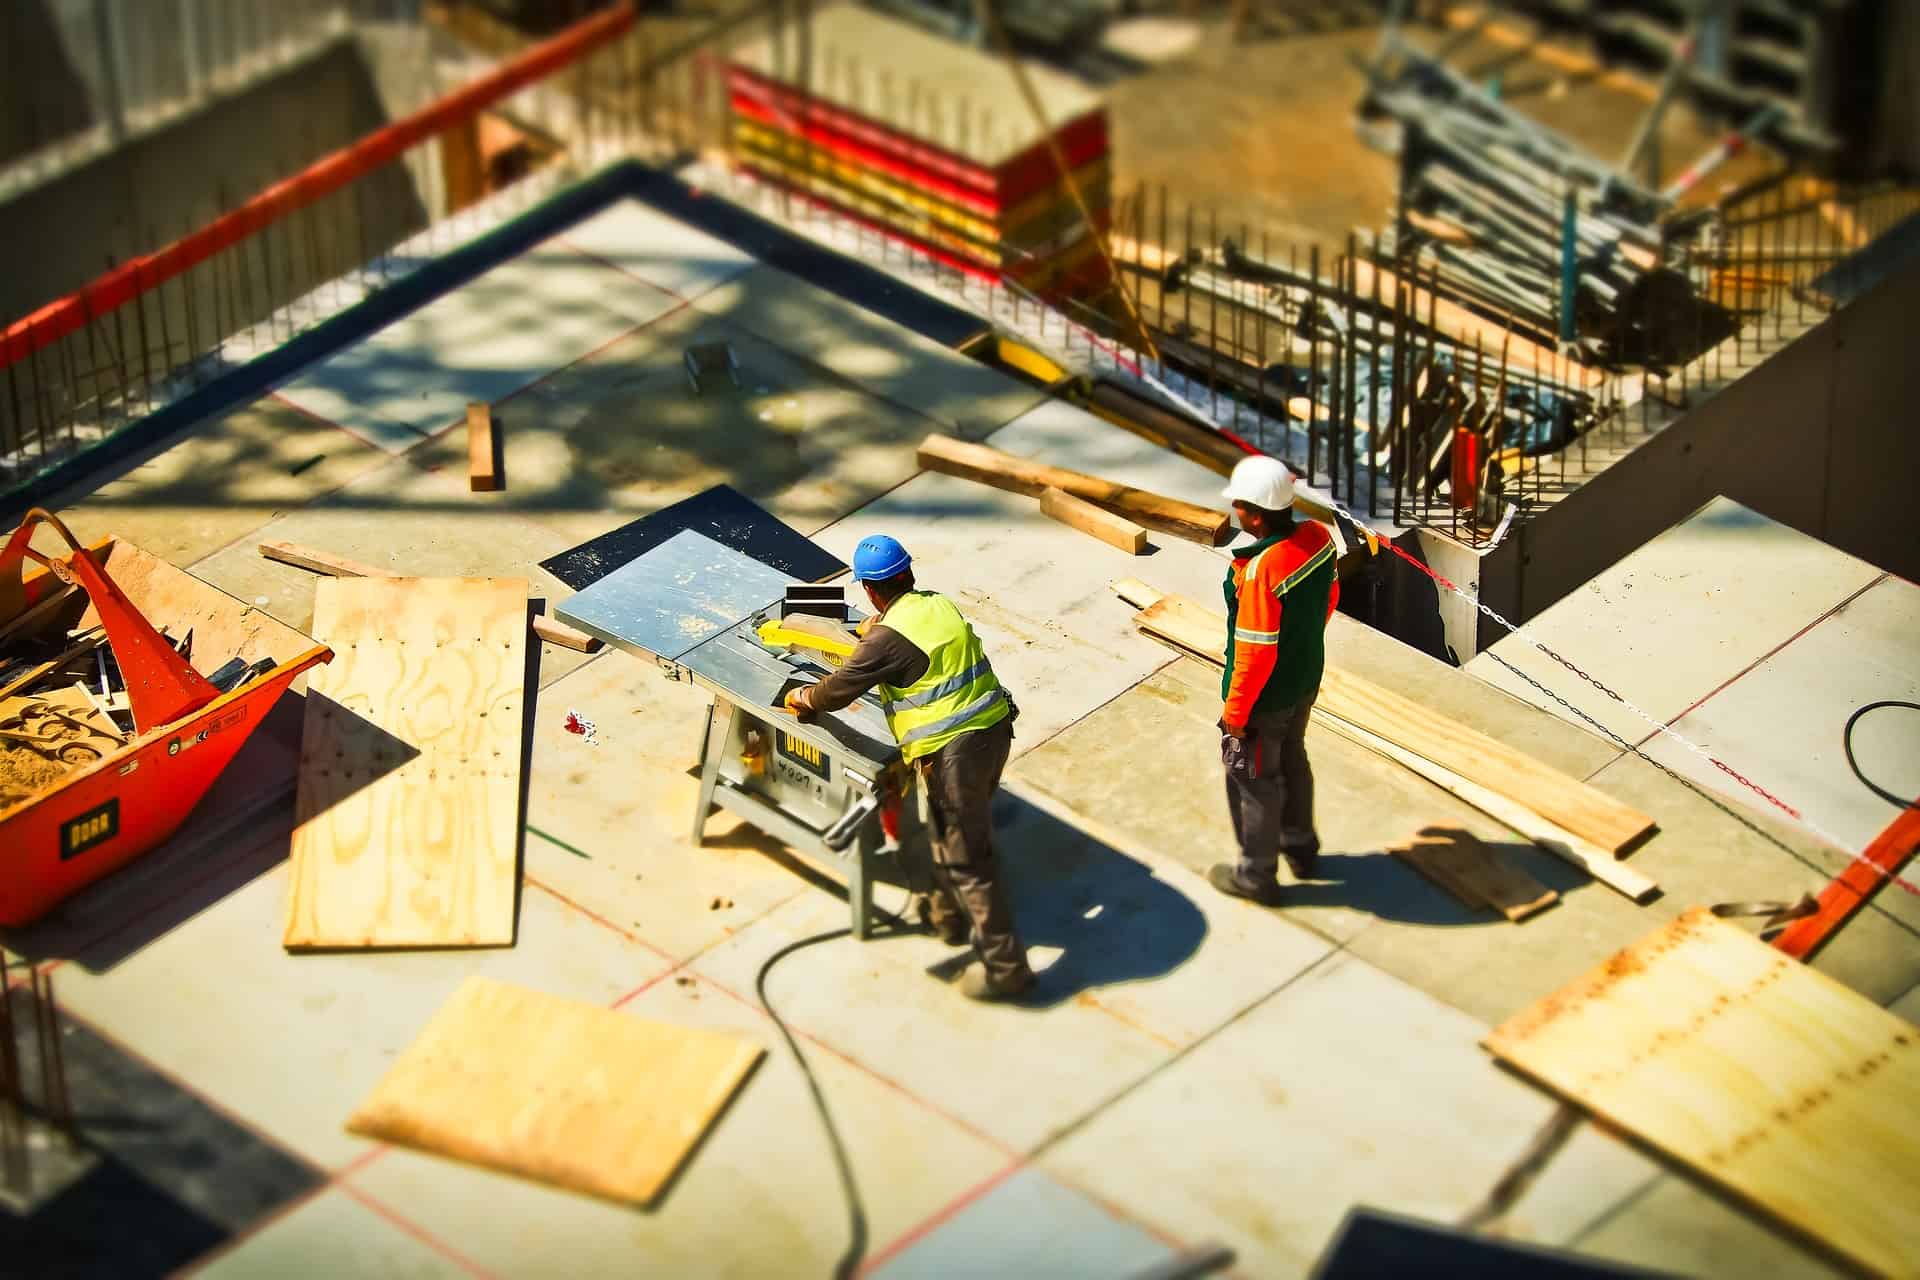 "Digitization is slowly finding its way into construction, but we're not there yet"